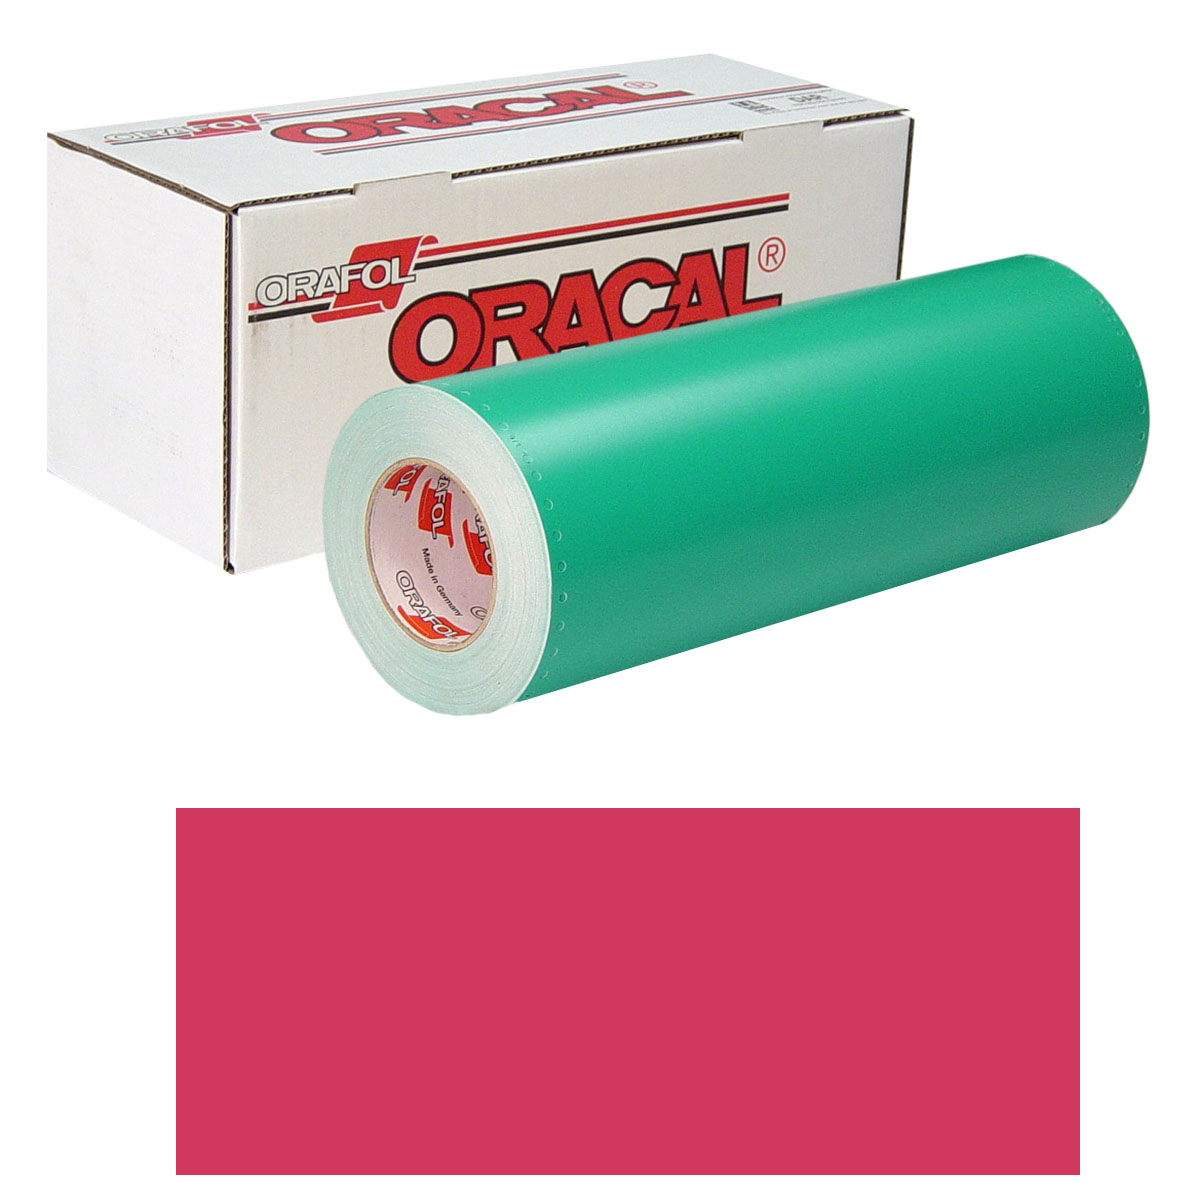 ORACAL 8500 15in X 10yd 032 Light Red